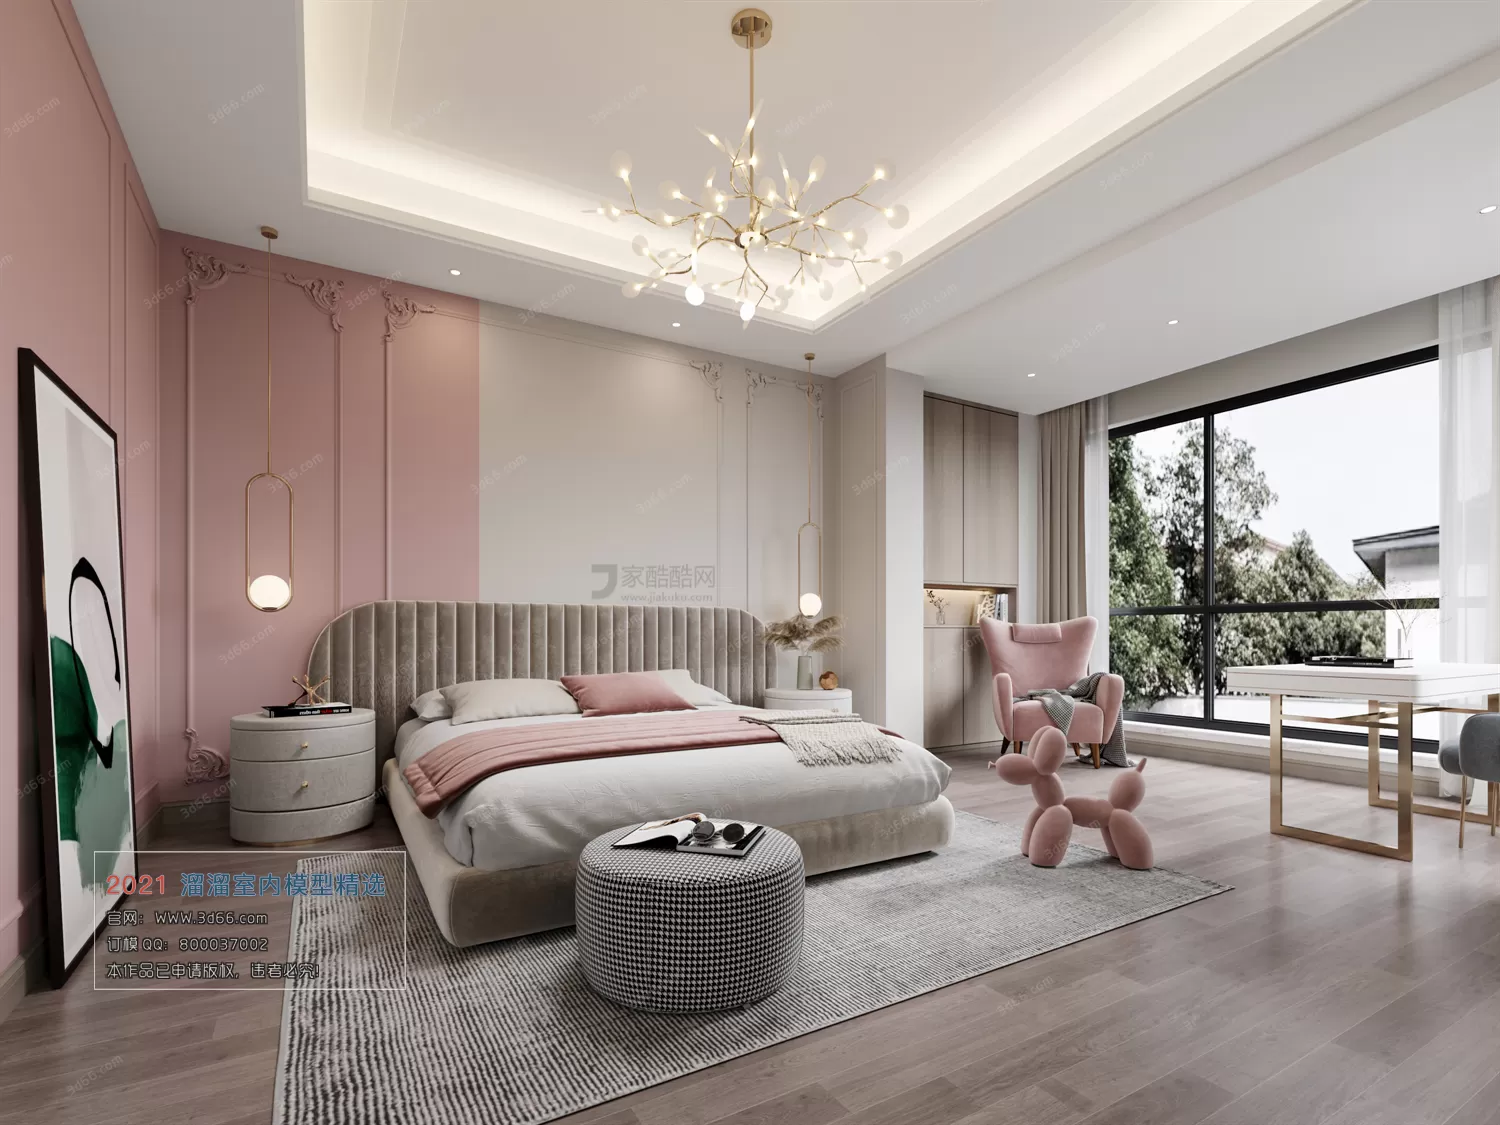 BEDROOM – A021-Modern style-Vray model